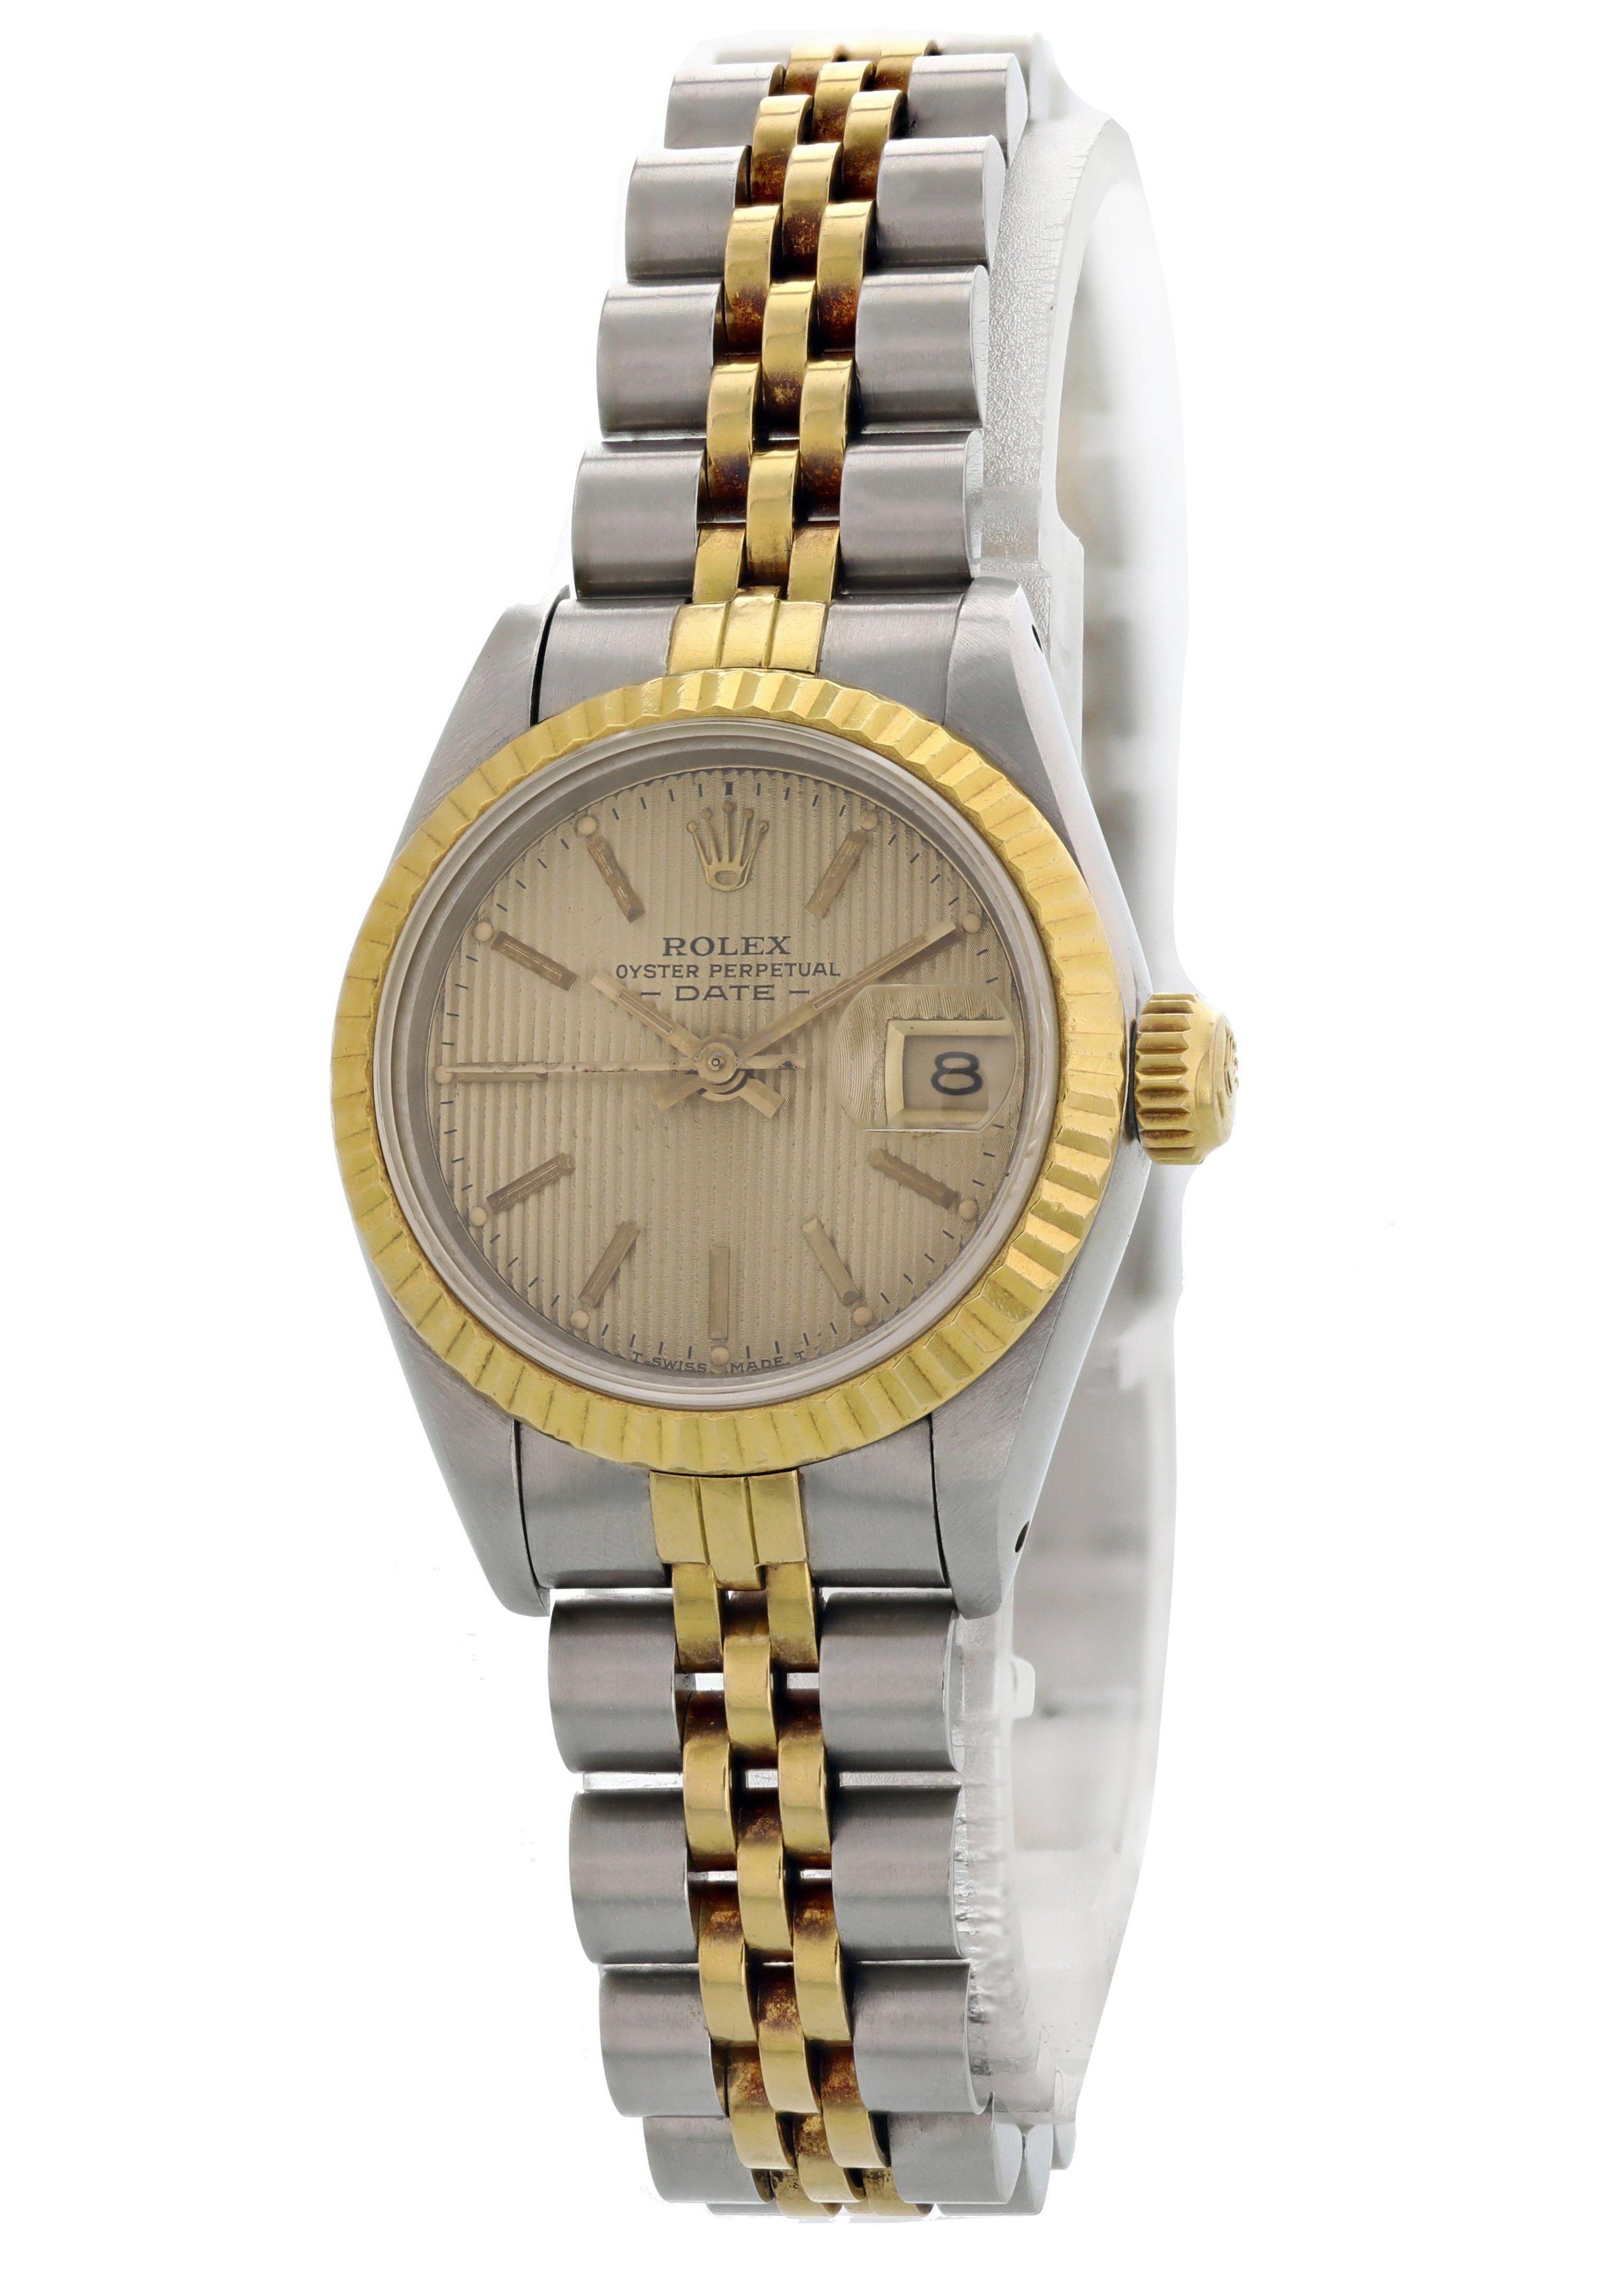 Rolex Oyster Perpetual Datejust Tapestry Dial Ladies Watch. Reference 69173. 26 mm stainless steel case. 18k yellow gold fluted bezel. Champagne tapestry dial with yellow gold hands and stick markers. 18k yellow gold and stainless steel Jubilee band